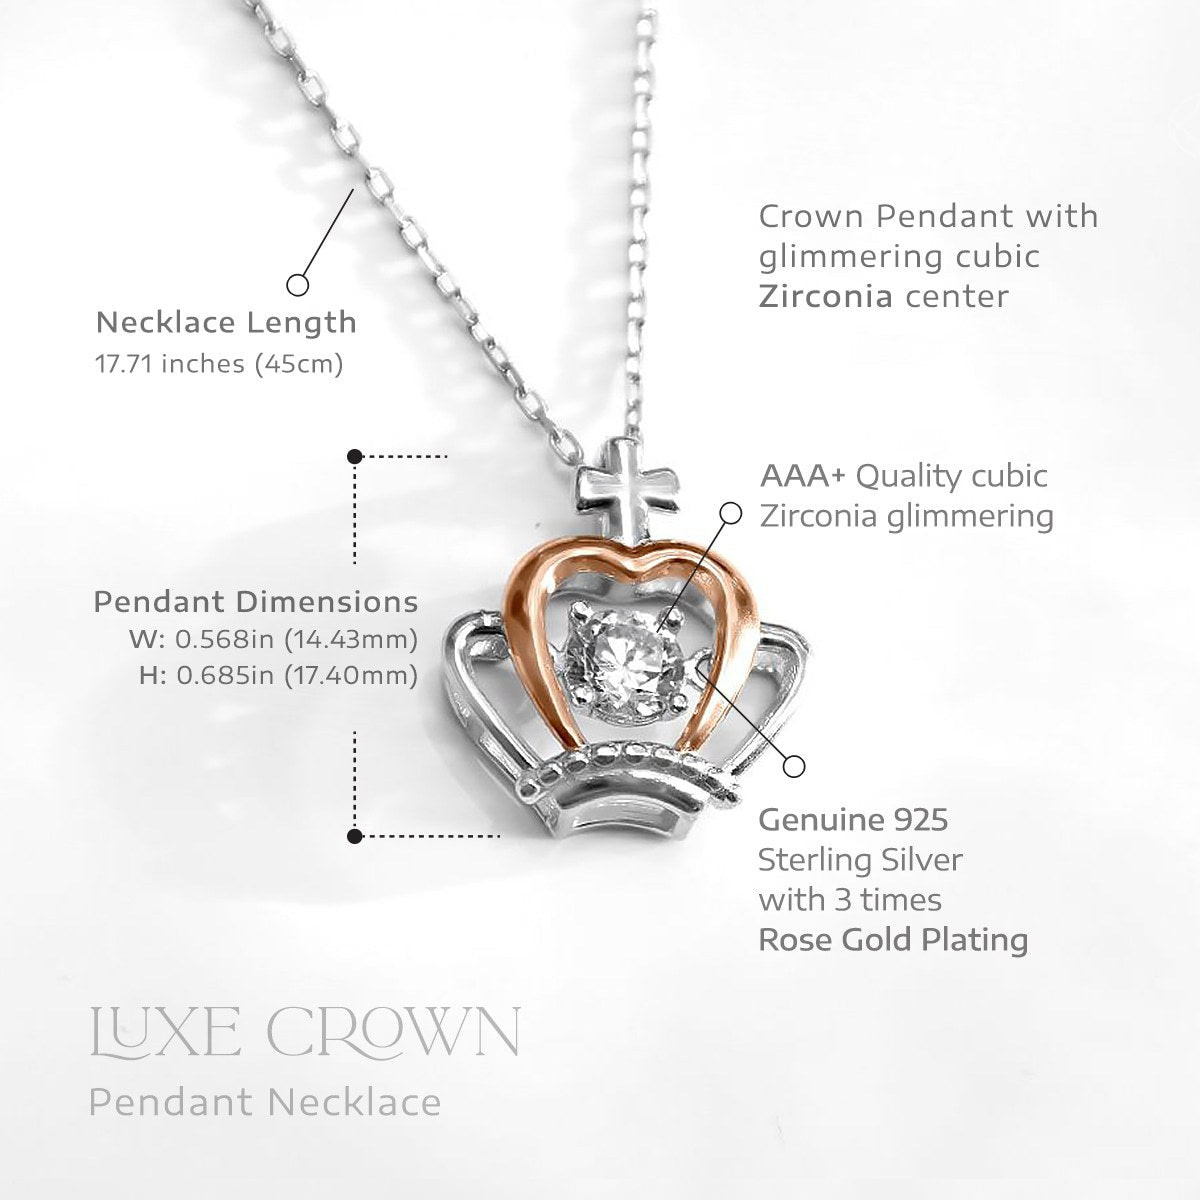 To My Precious Daughter - Luxe Crown Necklace Gift Set